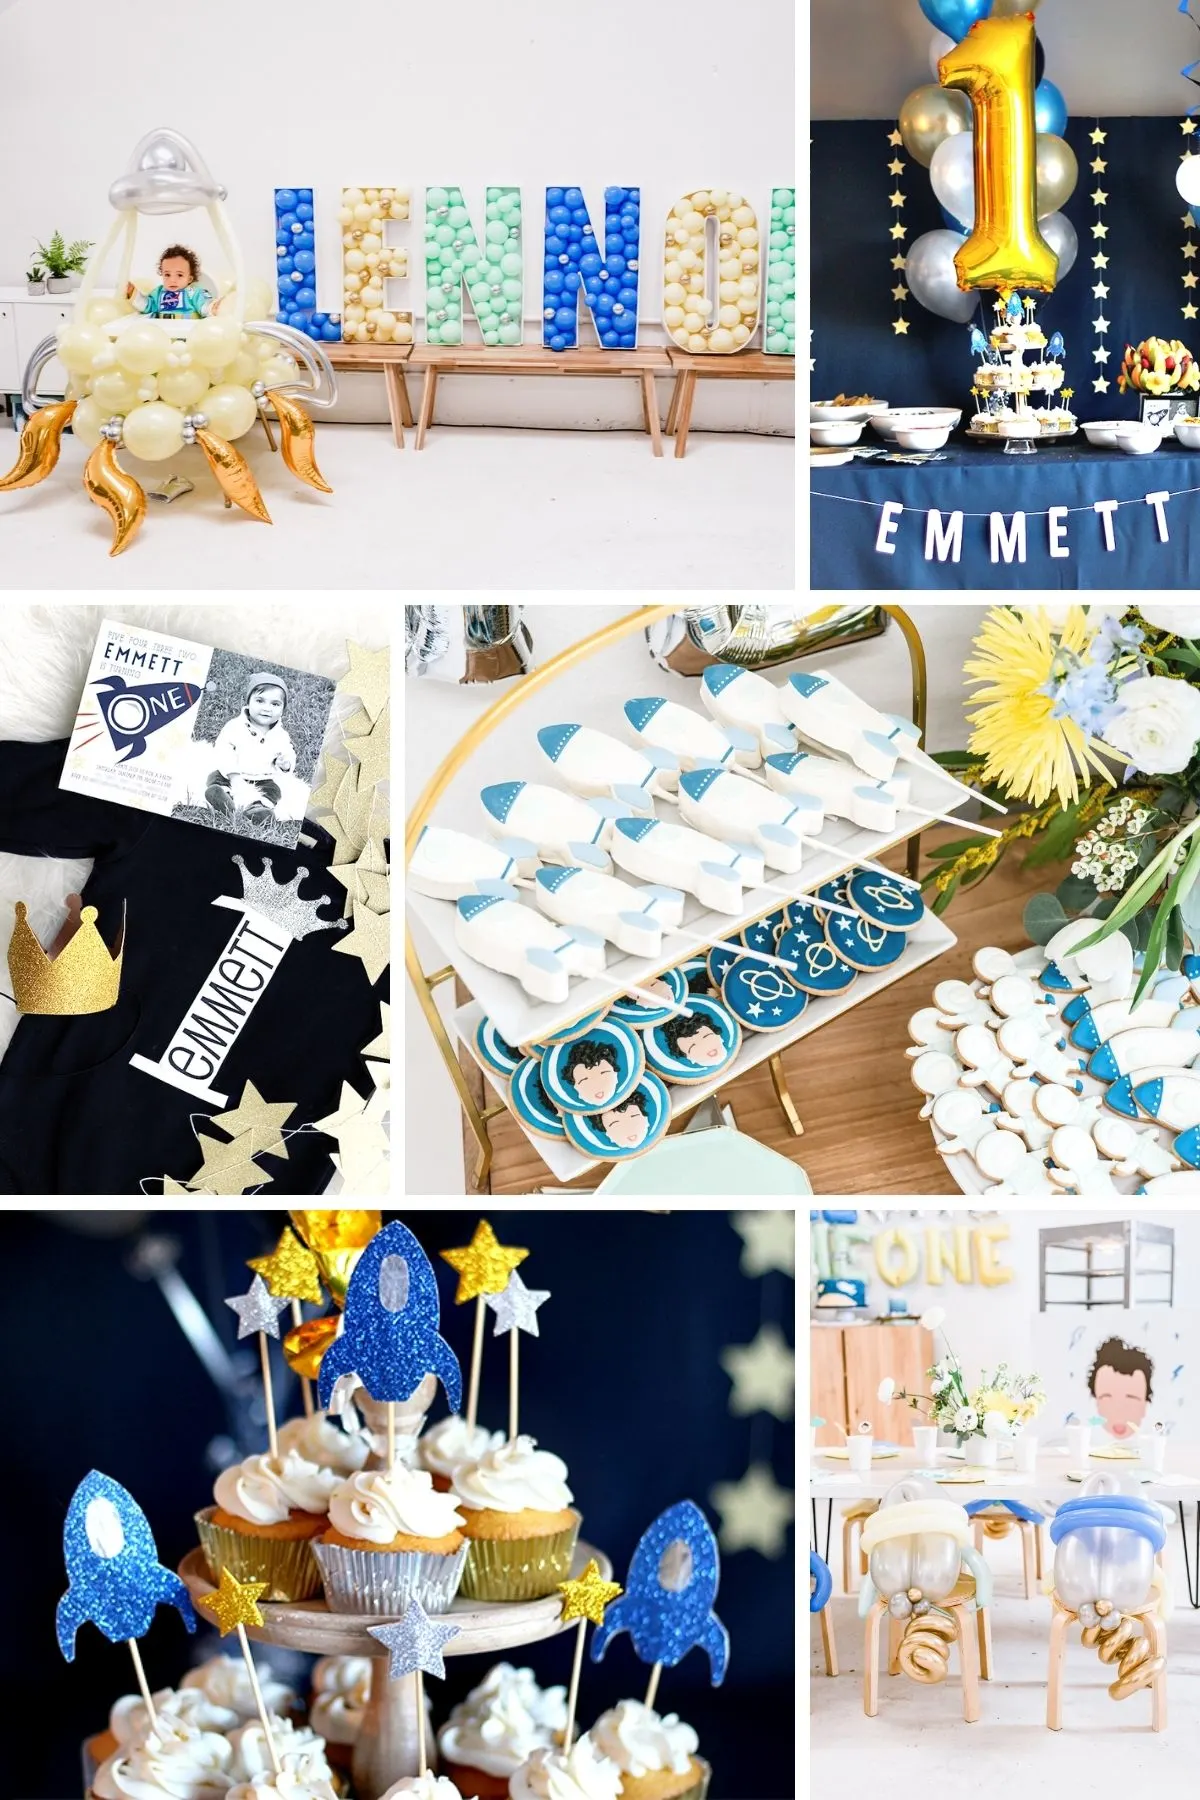 Photo collage for first launch party theme including balloons, cupcakes, and table settings.